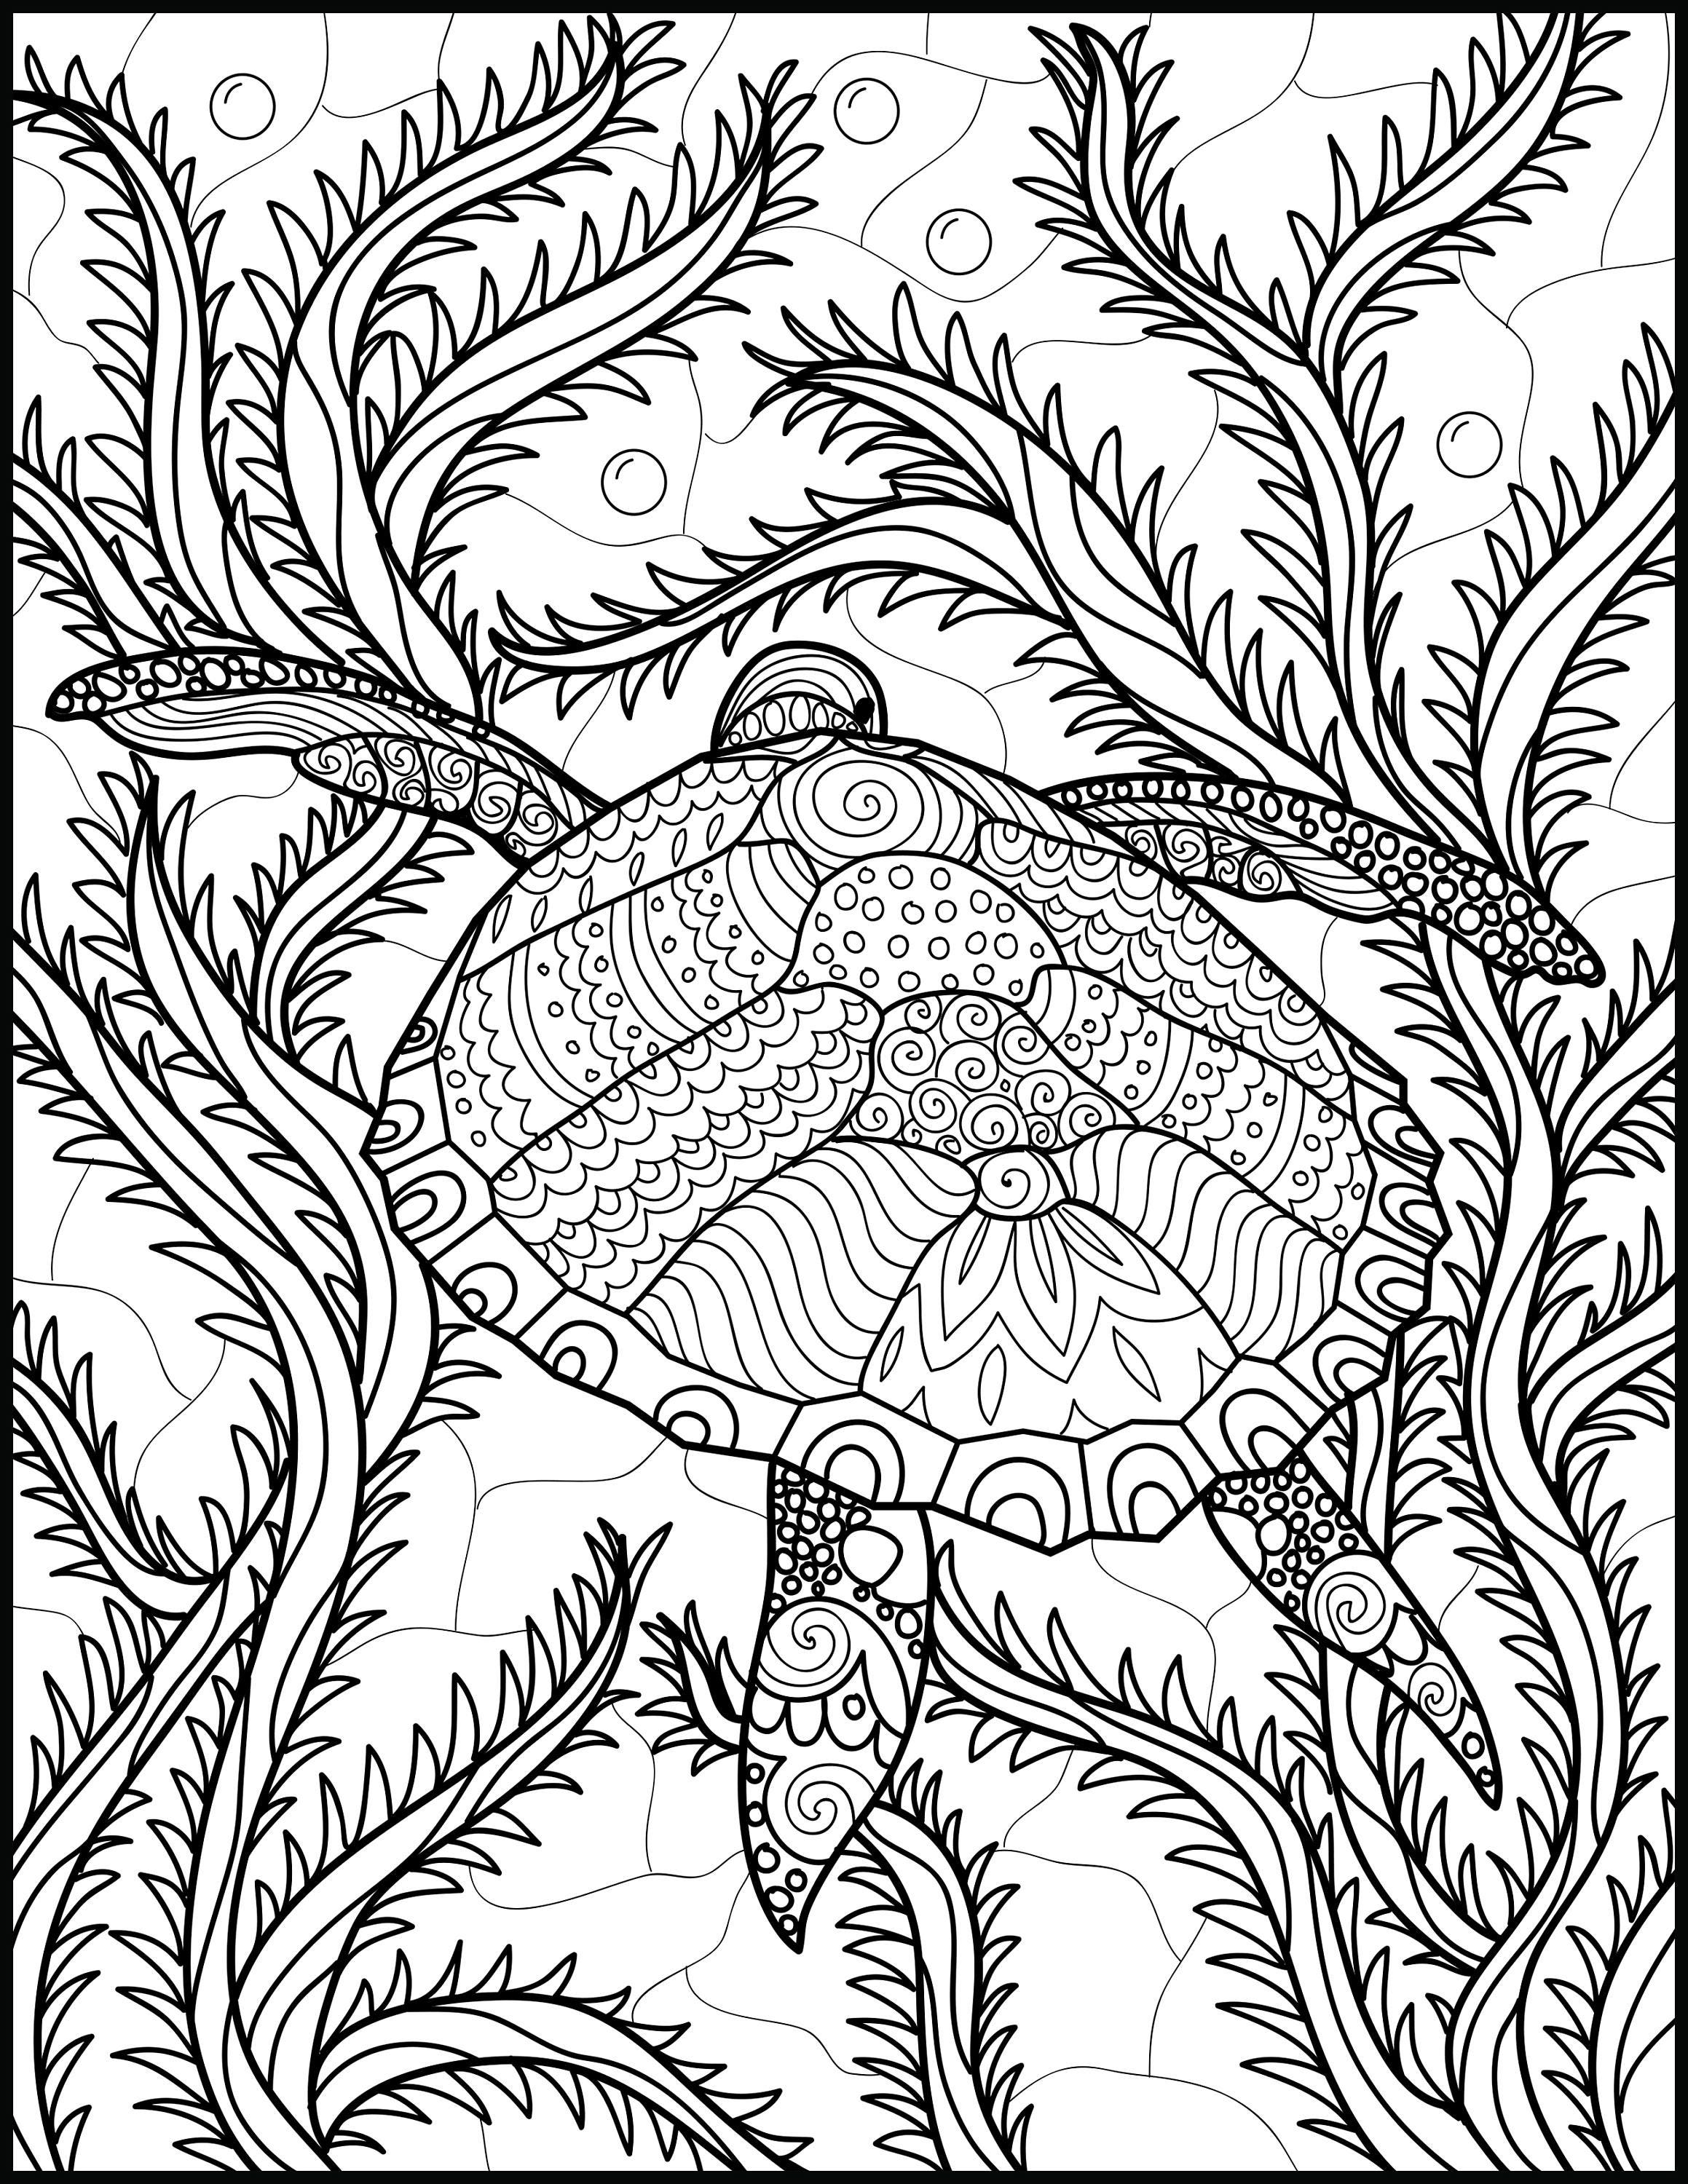 Download 2 Adult Coloring Pages Animal Coloring Page Printable